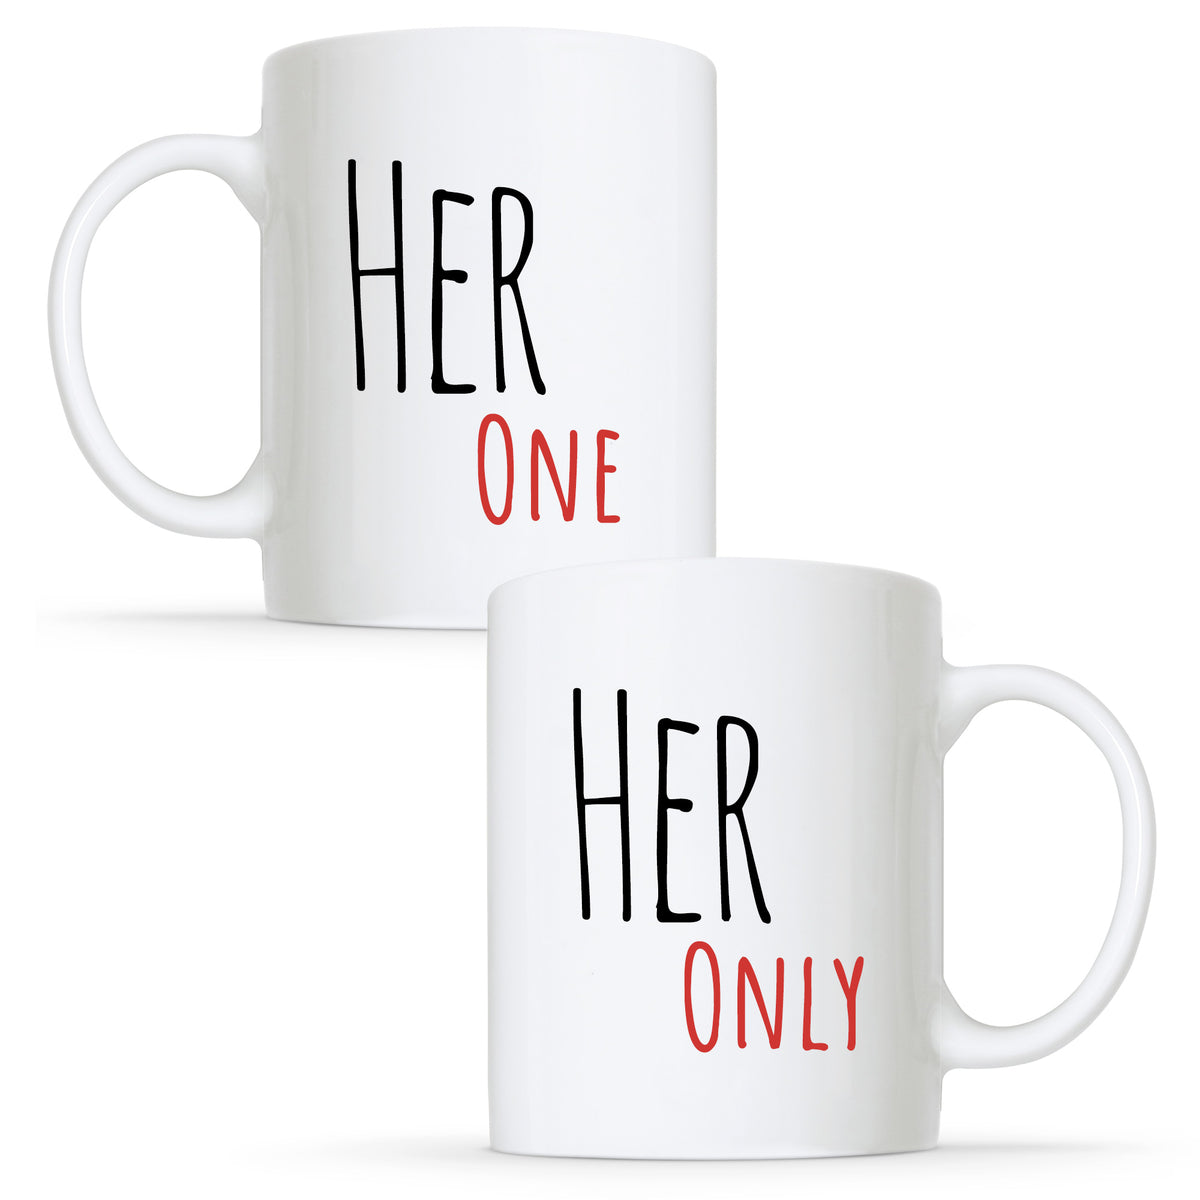 Her One &amp; Her Only - Gay Lesbian Couple Mug Set | Gift